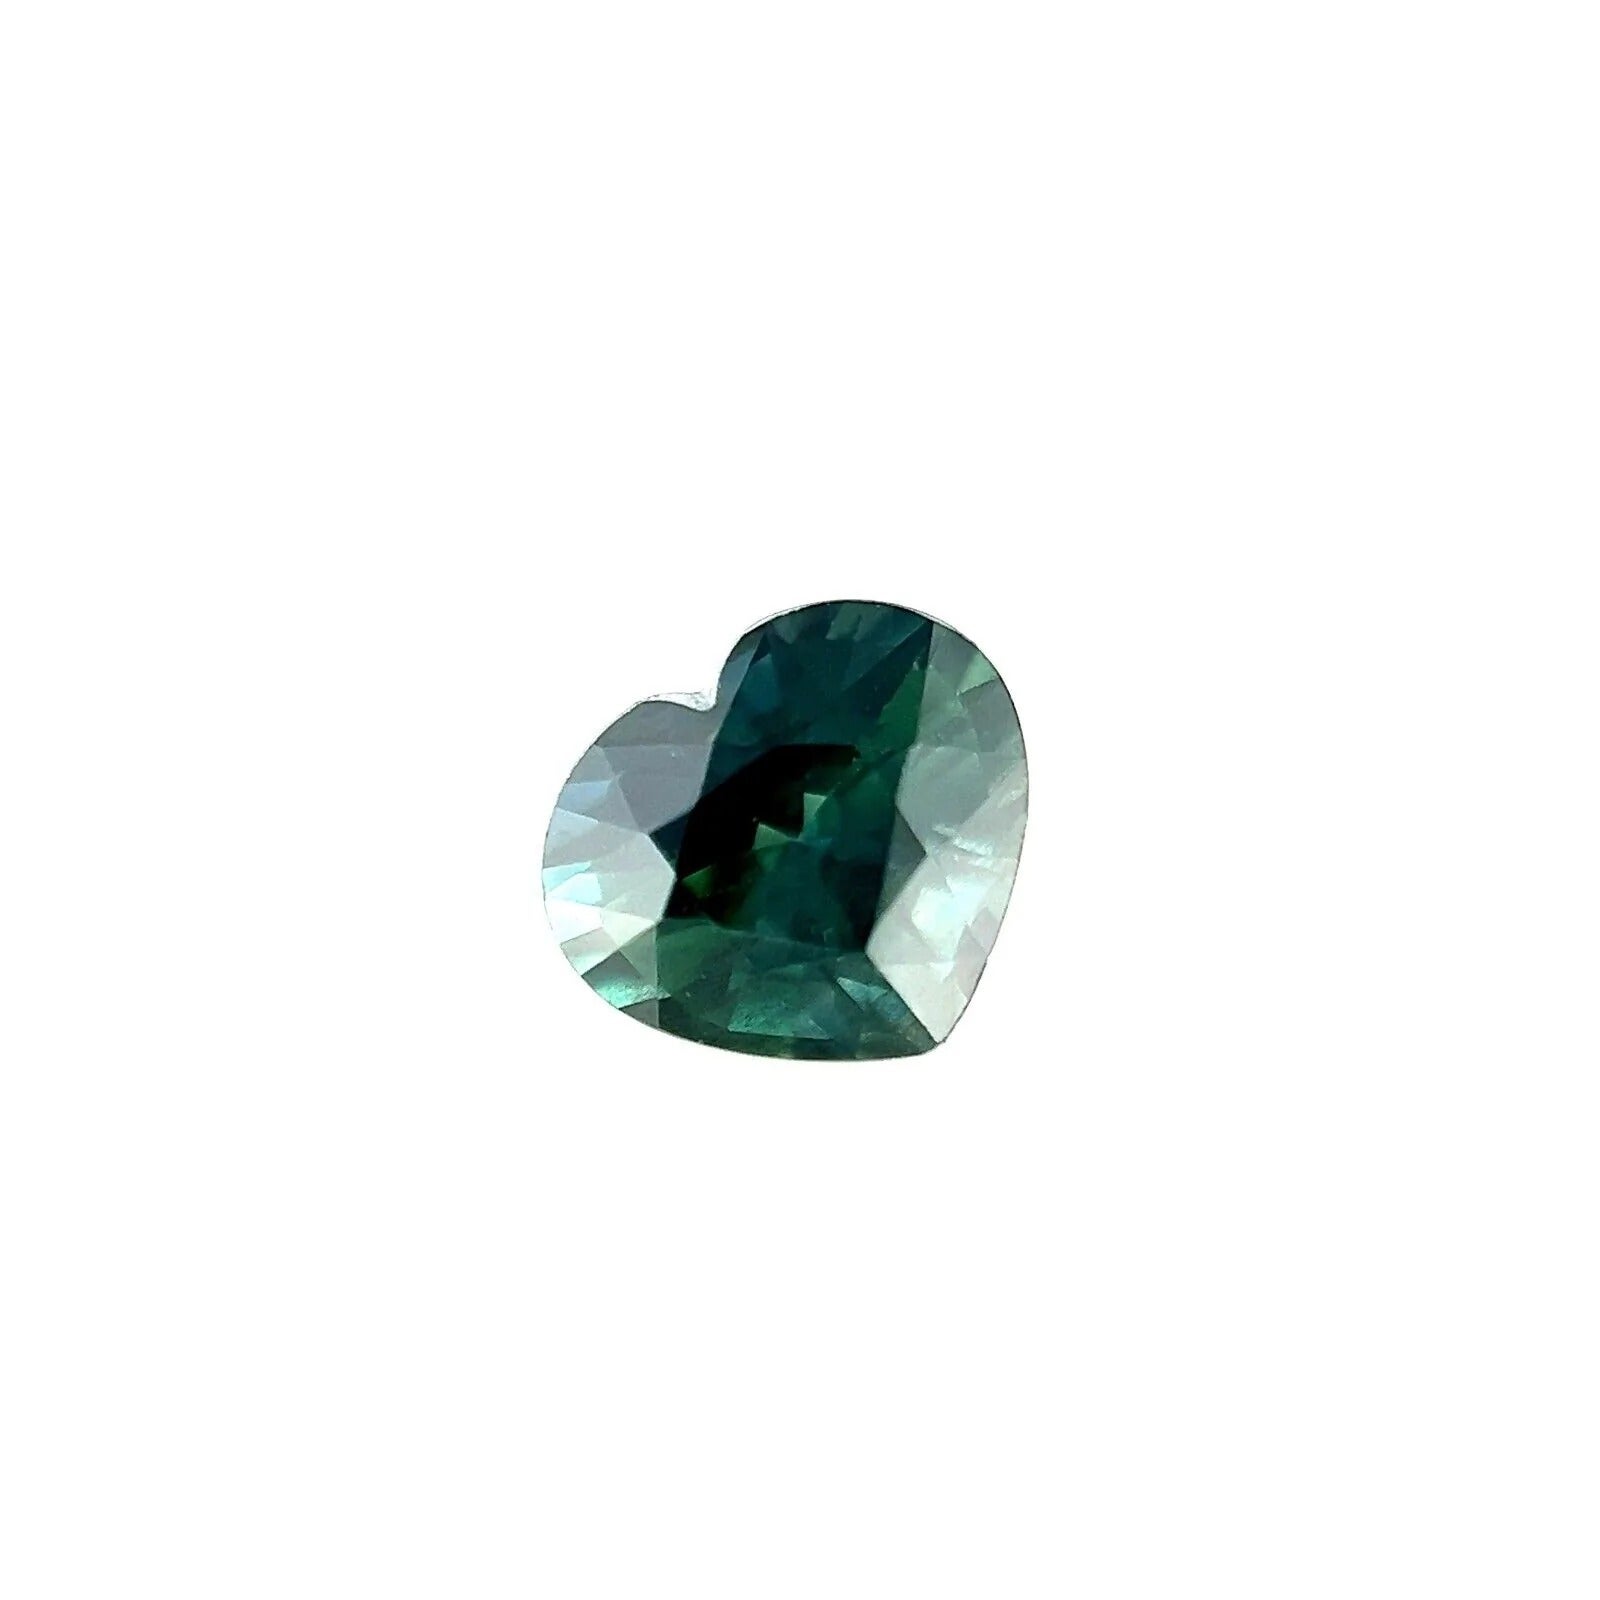 Untreated Natural Sapphire 1.16ct Fine Green Blue Teal Heart Cut Loose Gem VS For Sale